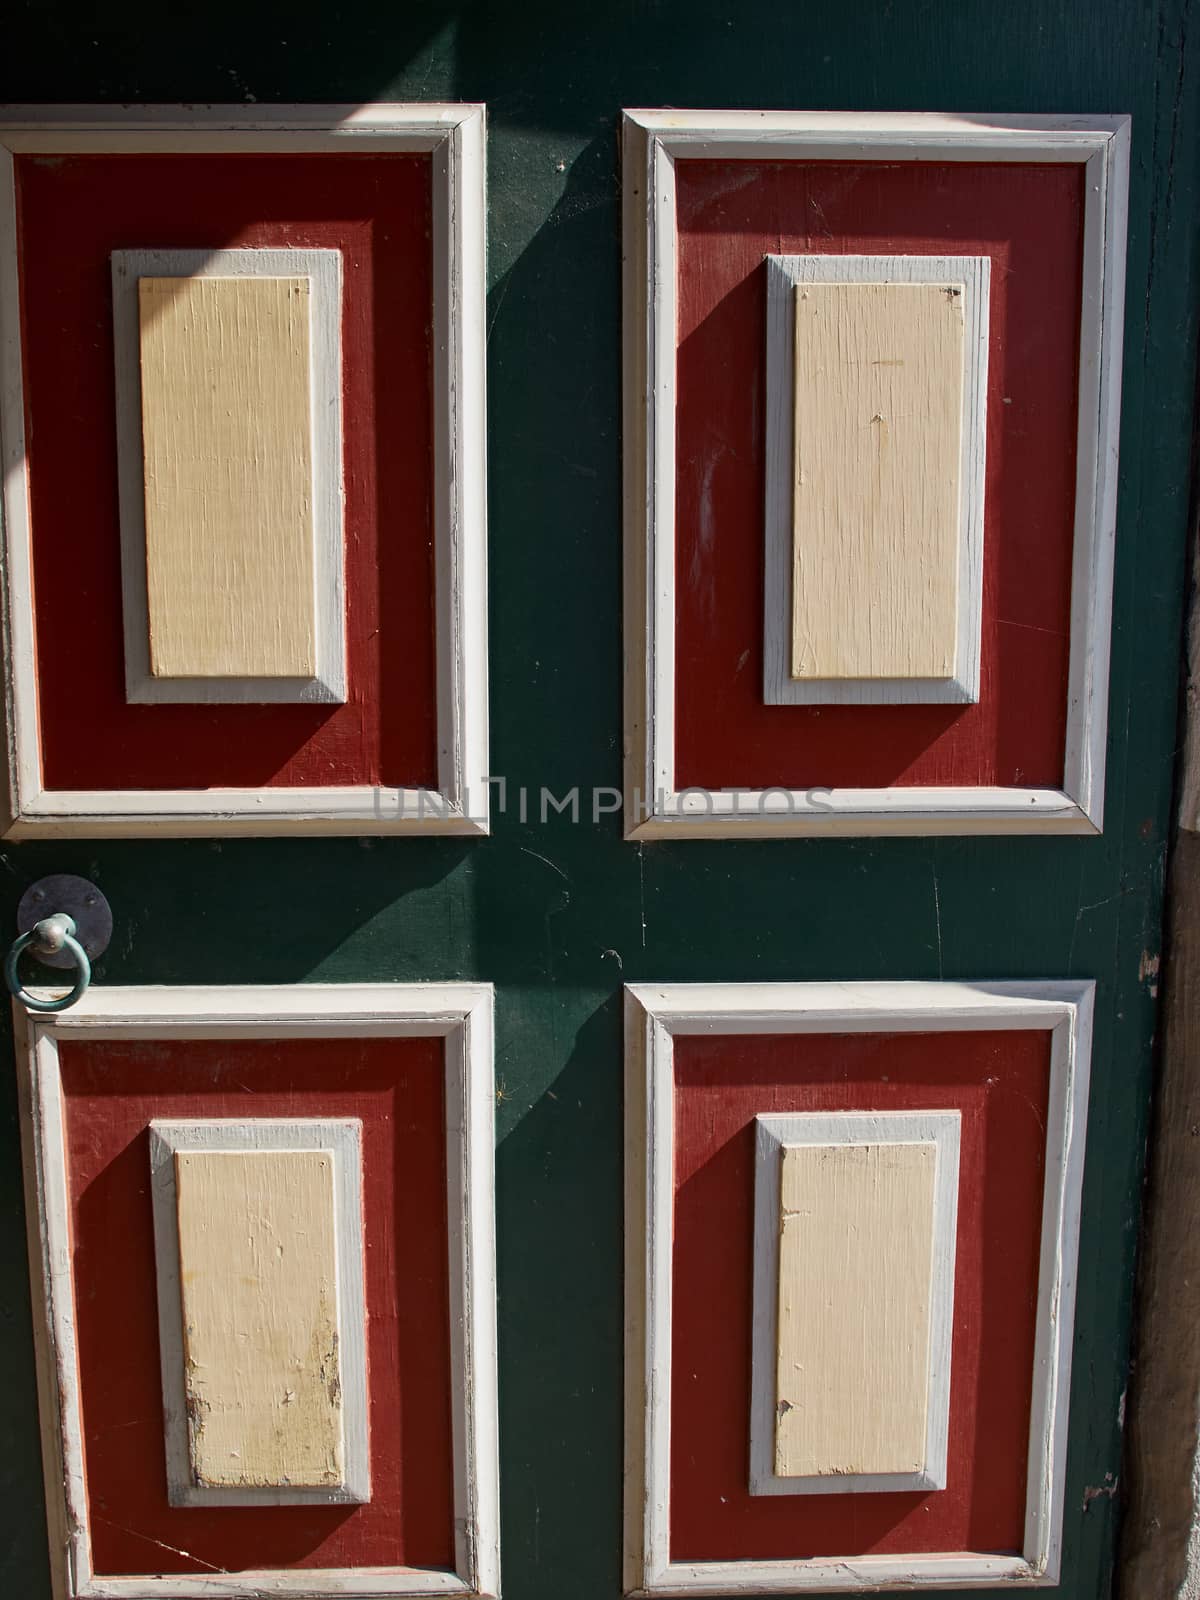 Bright colors traditional painted wooden door by Ronyzmbow